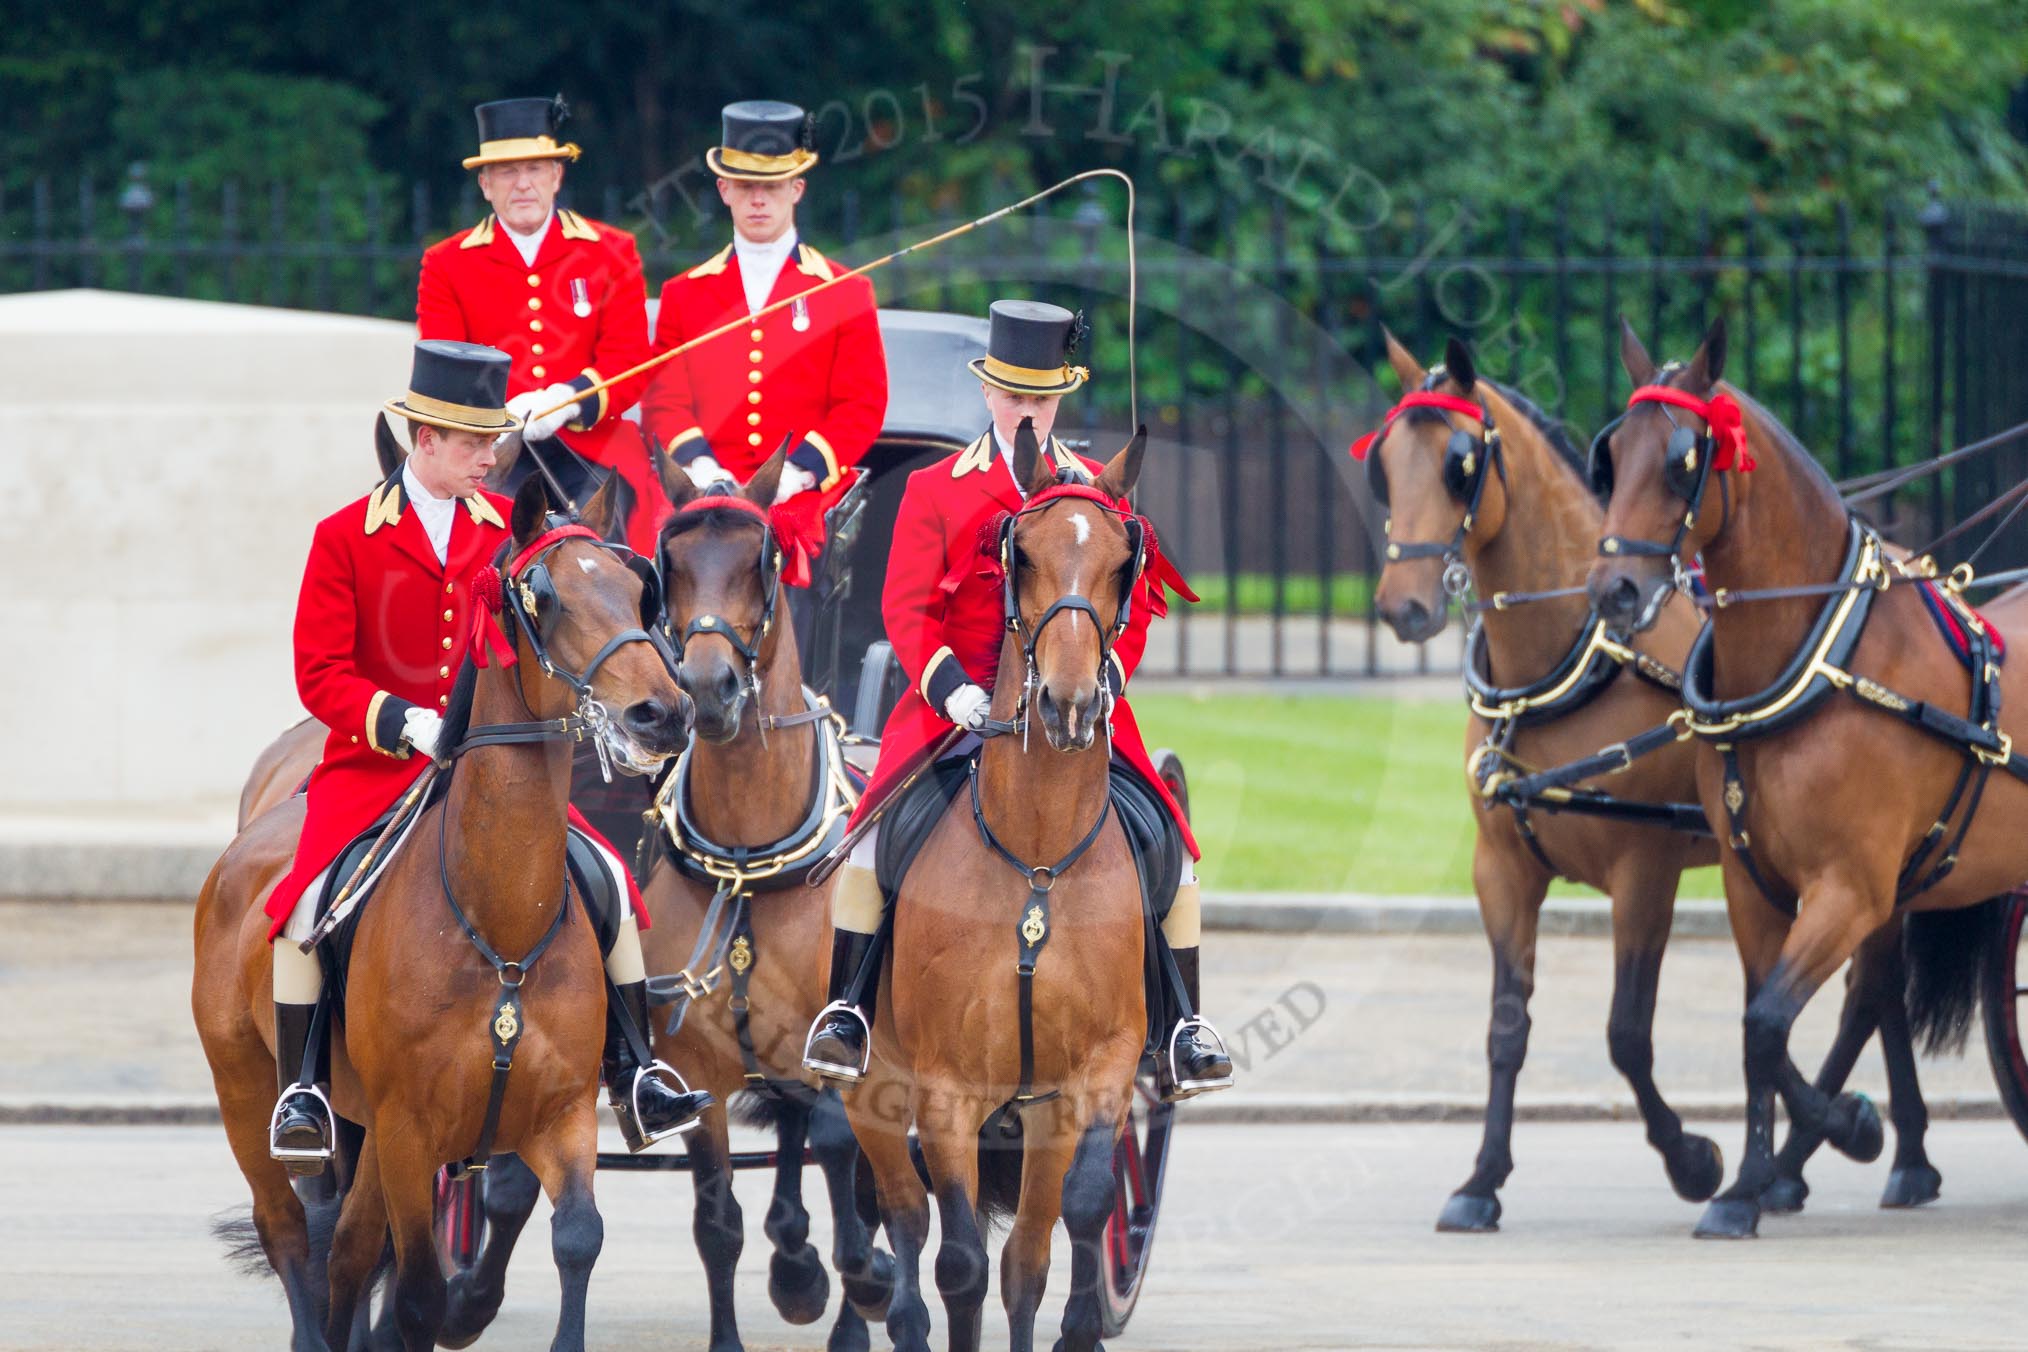 The Colonel's Review 2016.
Horse Guards Parade, Westminster,
London,

United Kingdom,
on 04 June 2016 at 10:51, image #132